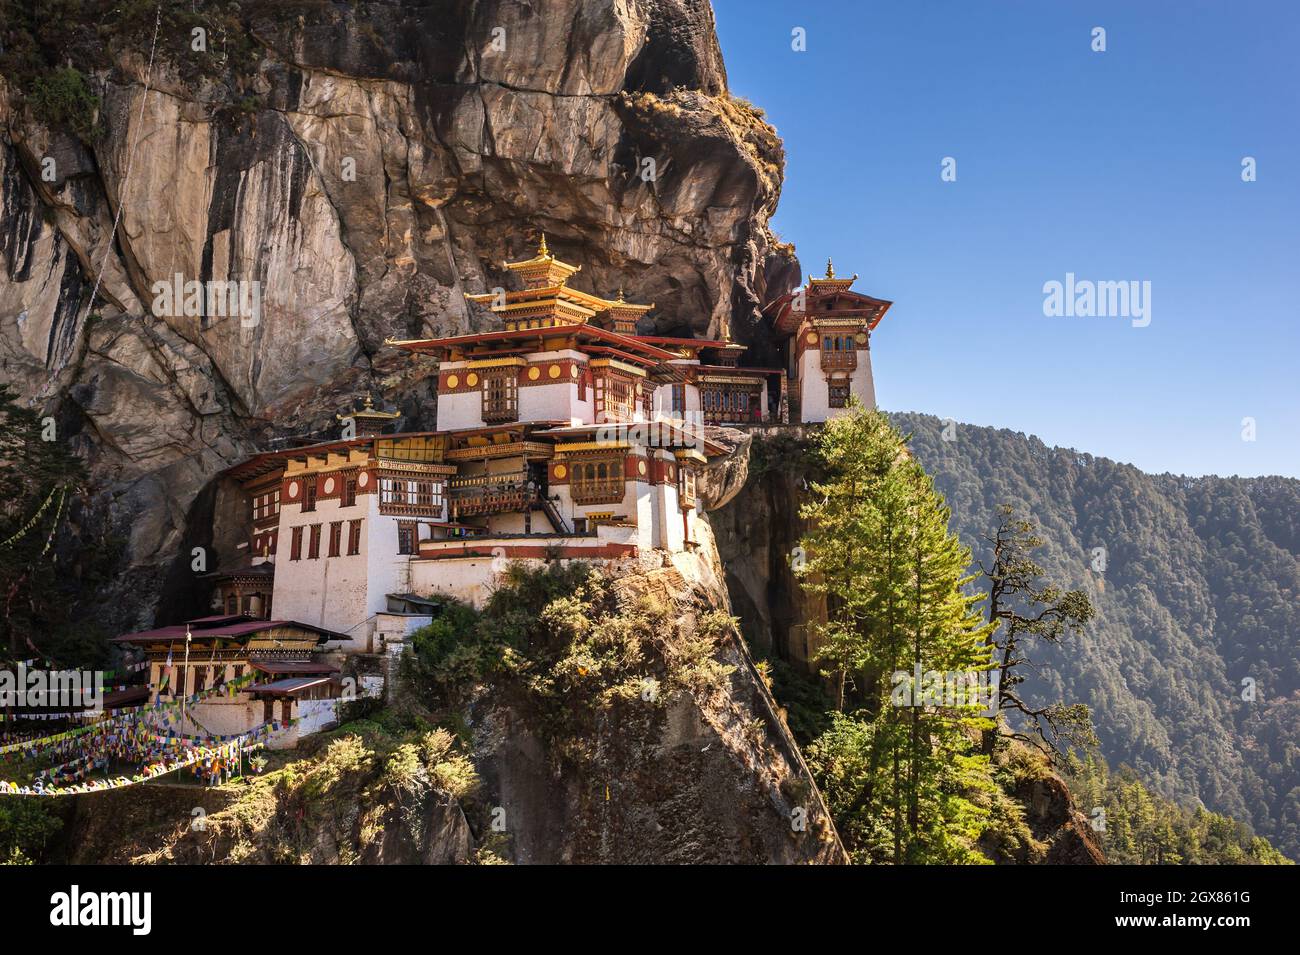 Paro Taktsang, known as Tiger's Nest, is a prominent Buddhist sacred site in Bhutan. Stock Photo